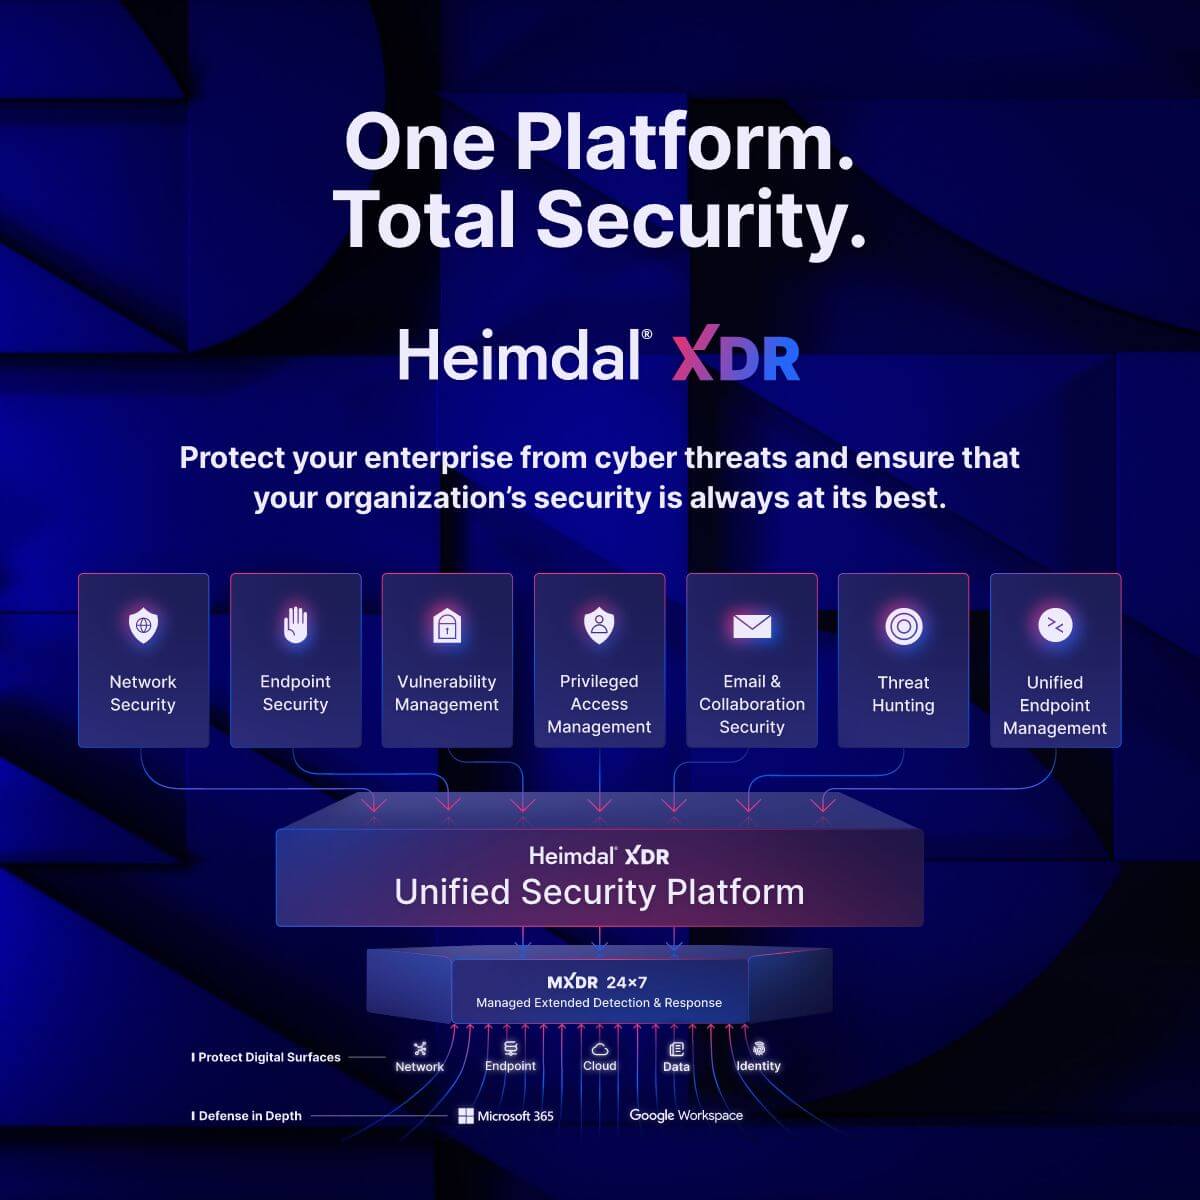 heimdal xdr software stack.